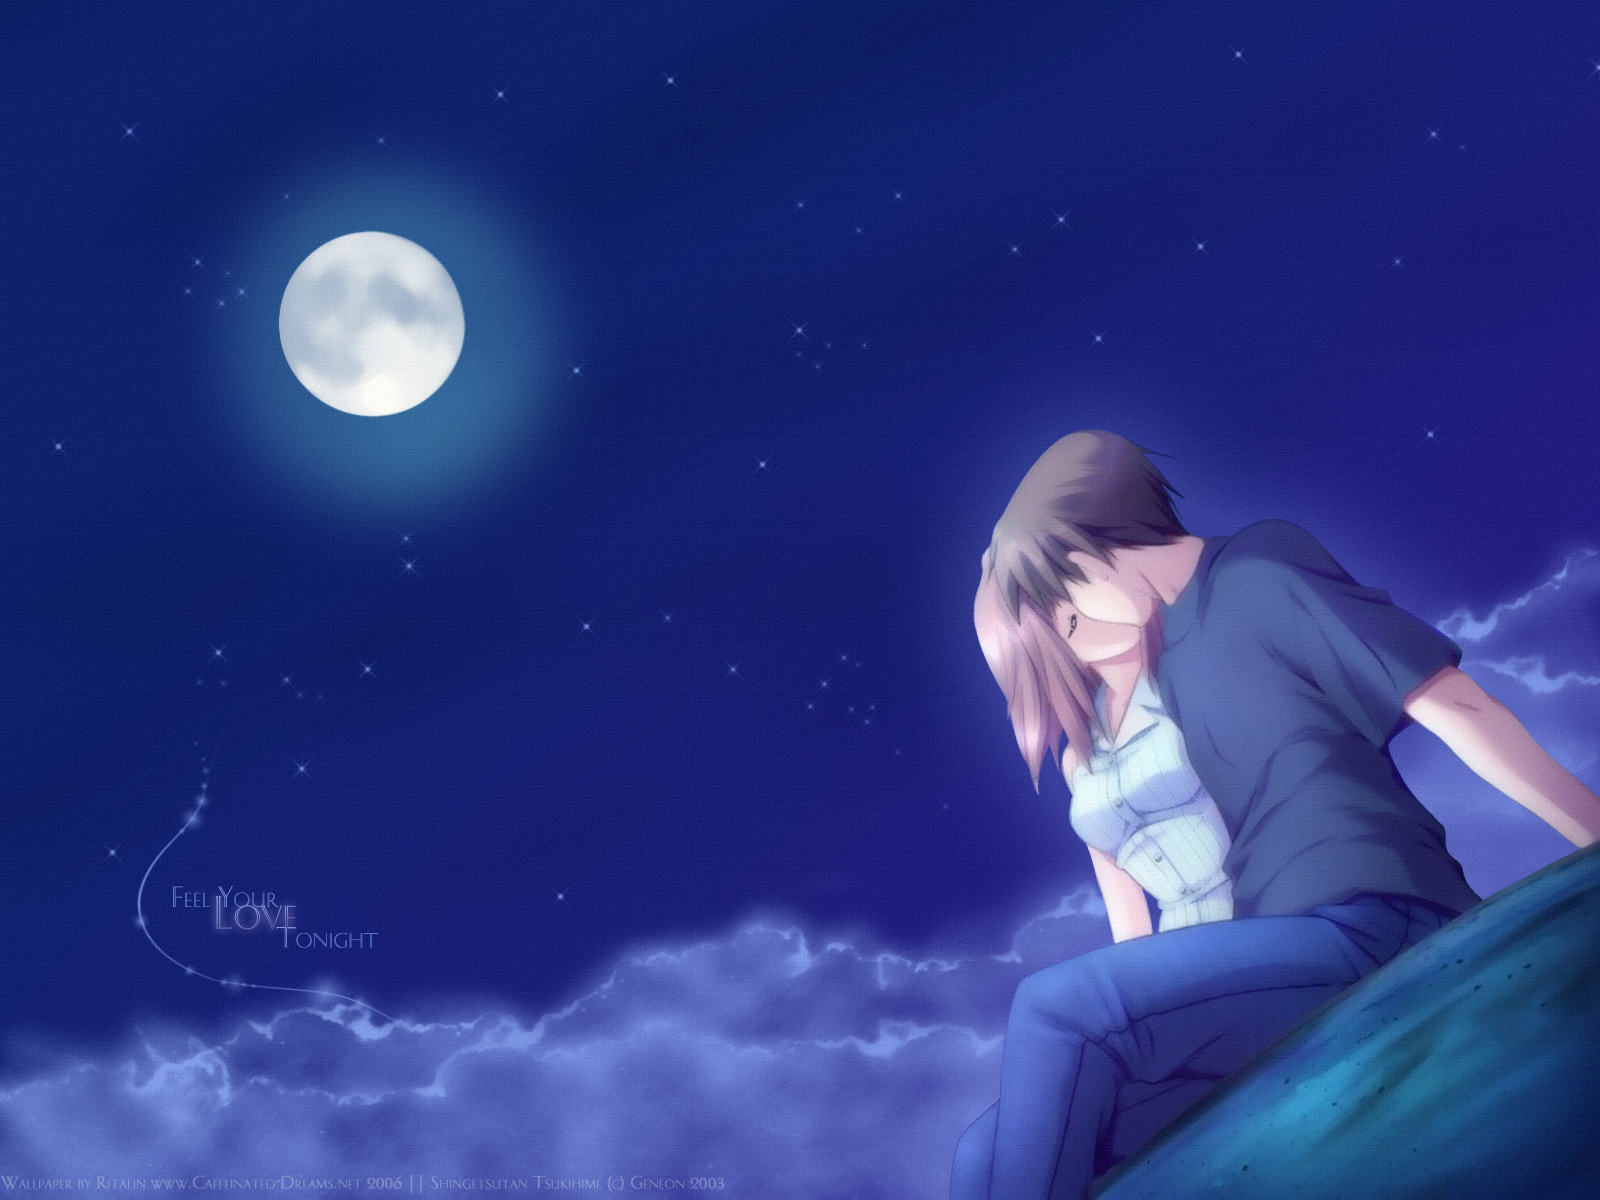 Anime Love Wallpapers For Desktop Background | 2013 Free ...